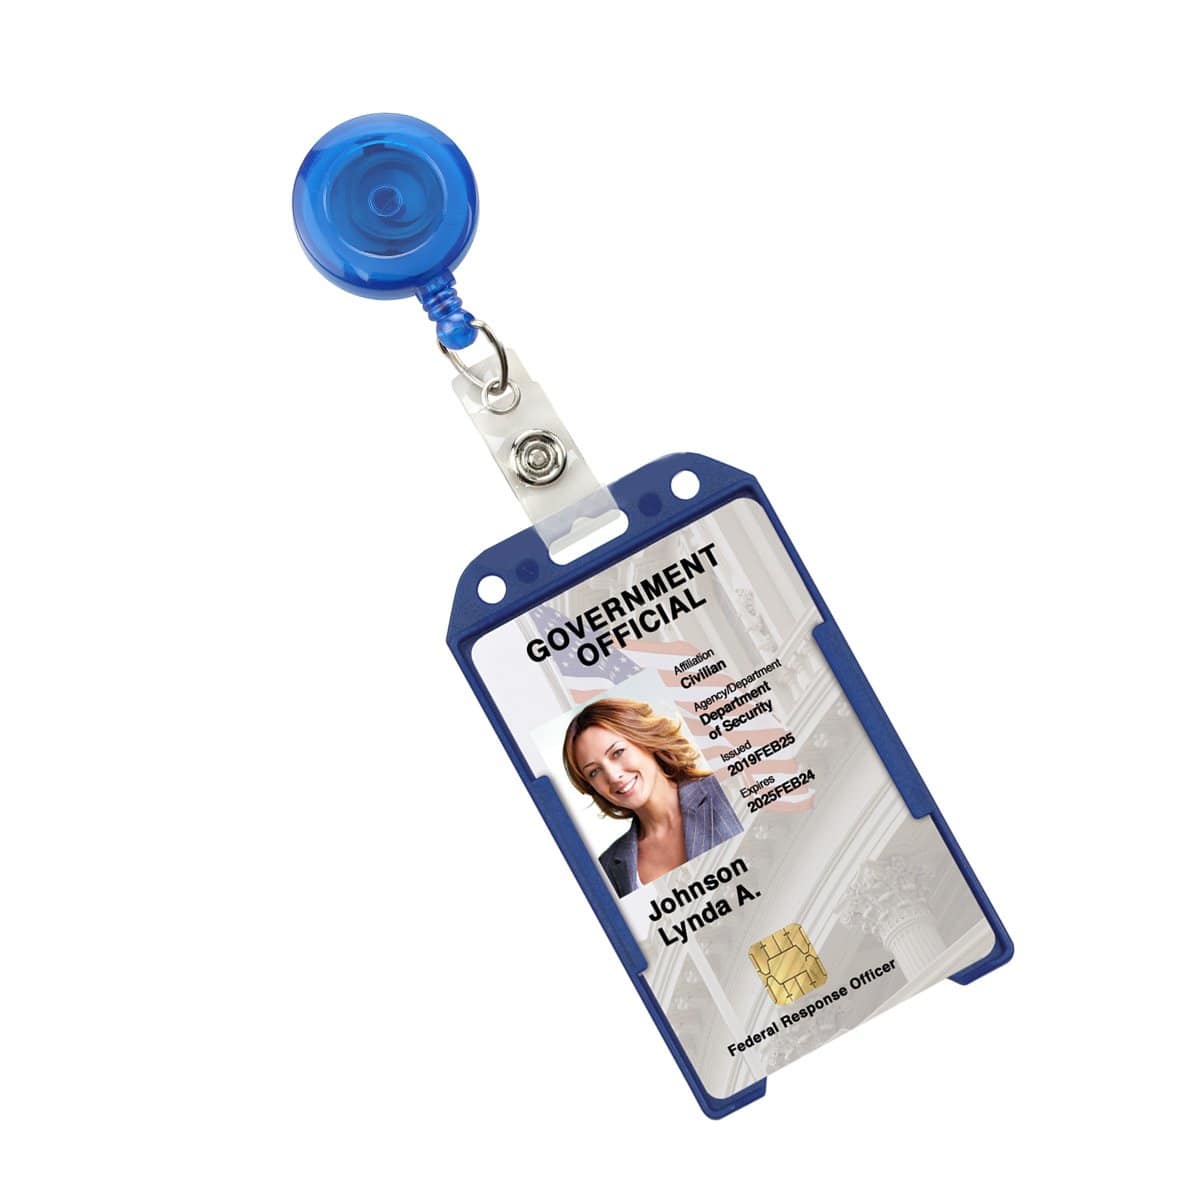 Frosted Vertical Rigid ID Badge Holder with Red Extractor Slide (p/n 1840-6566)